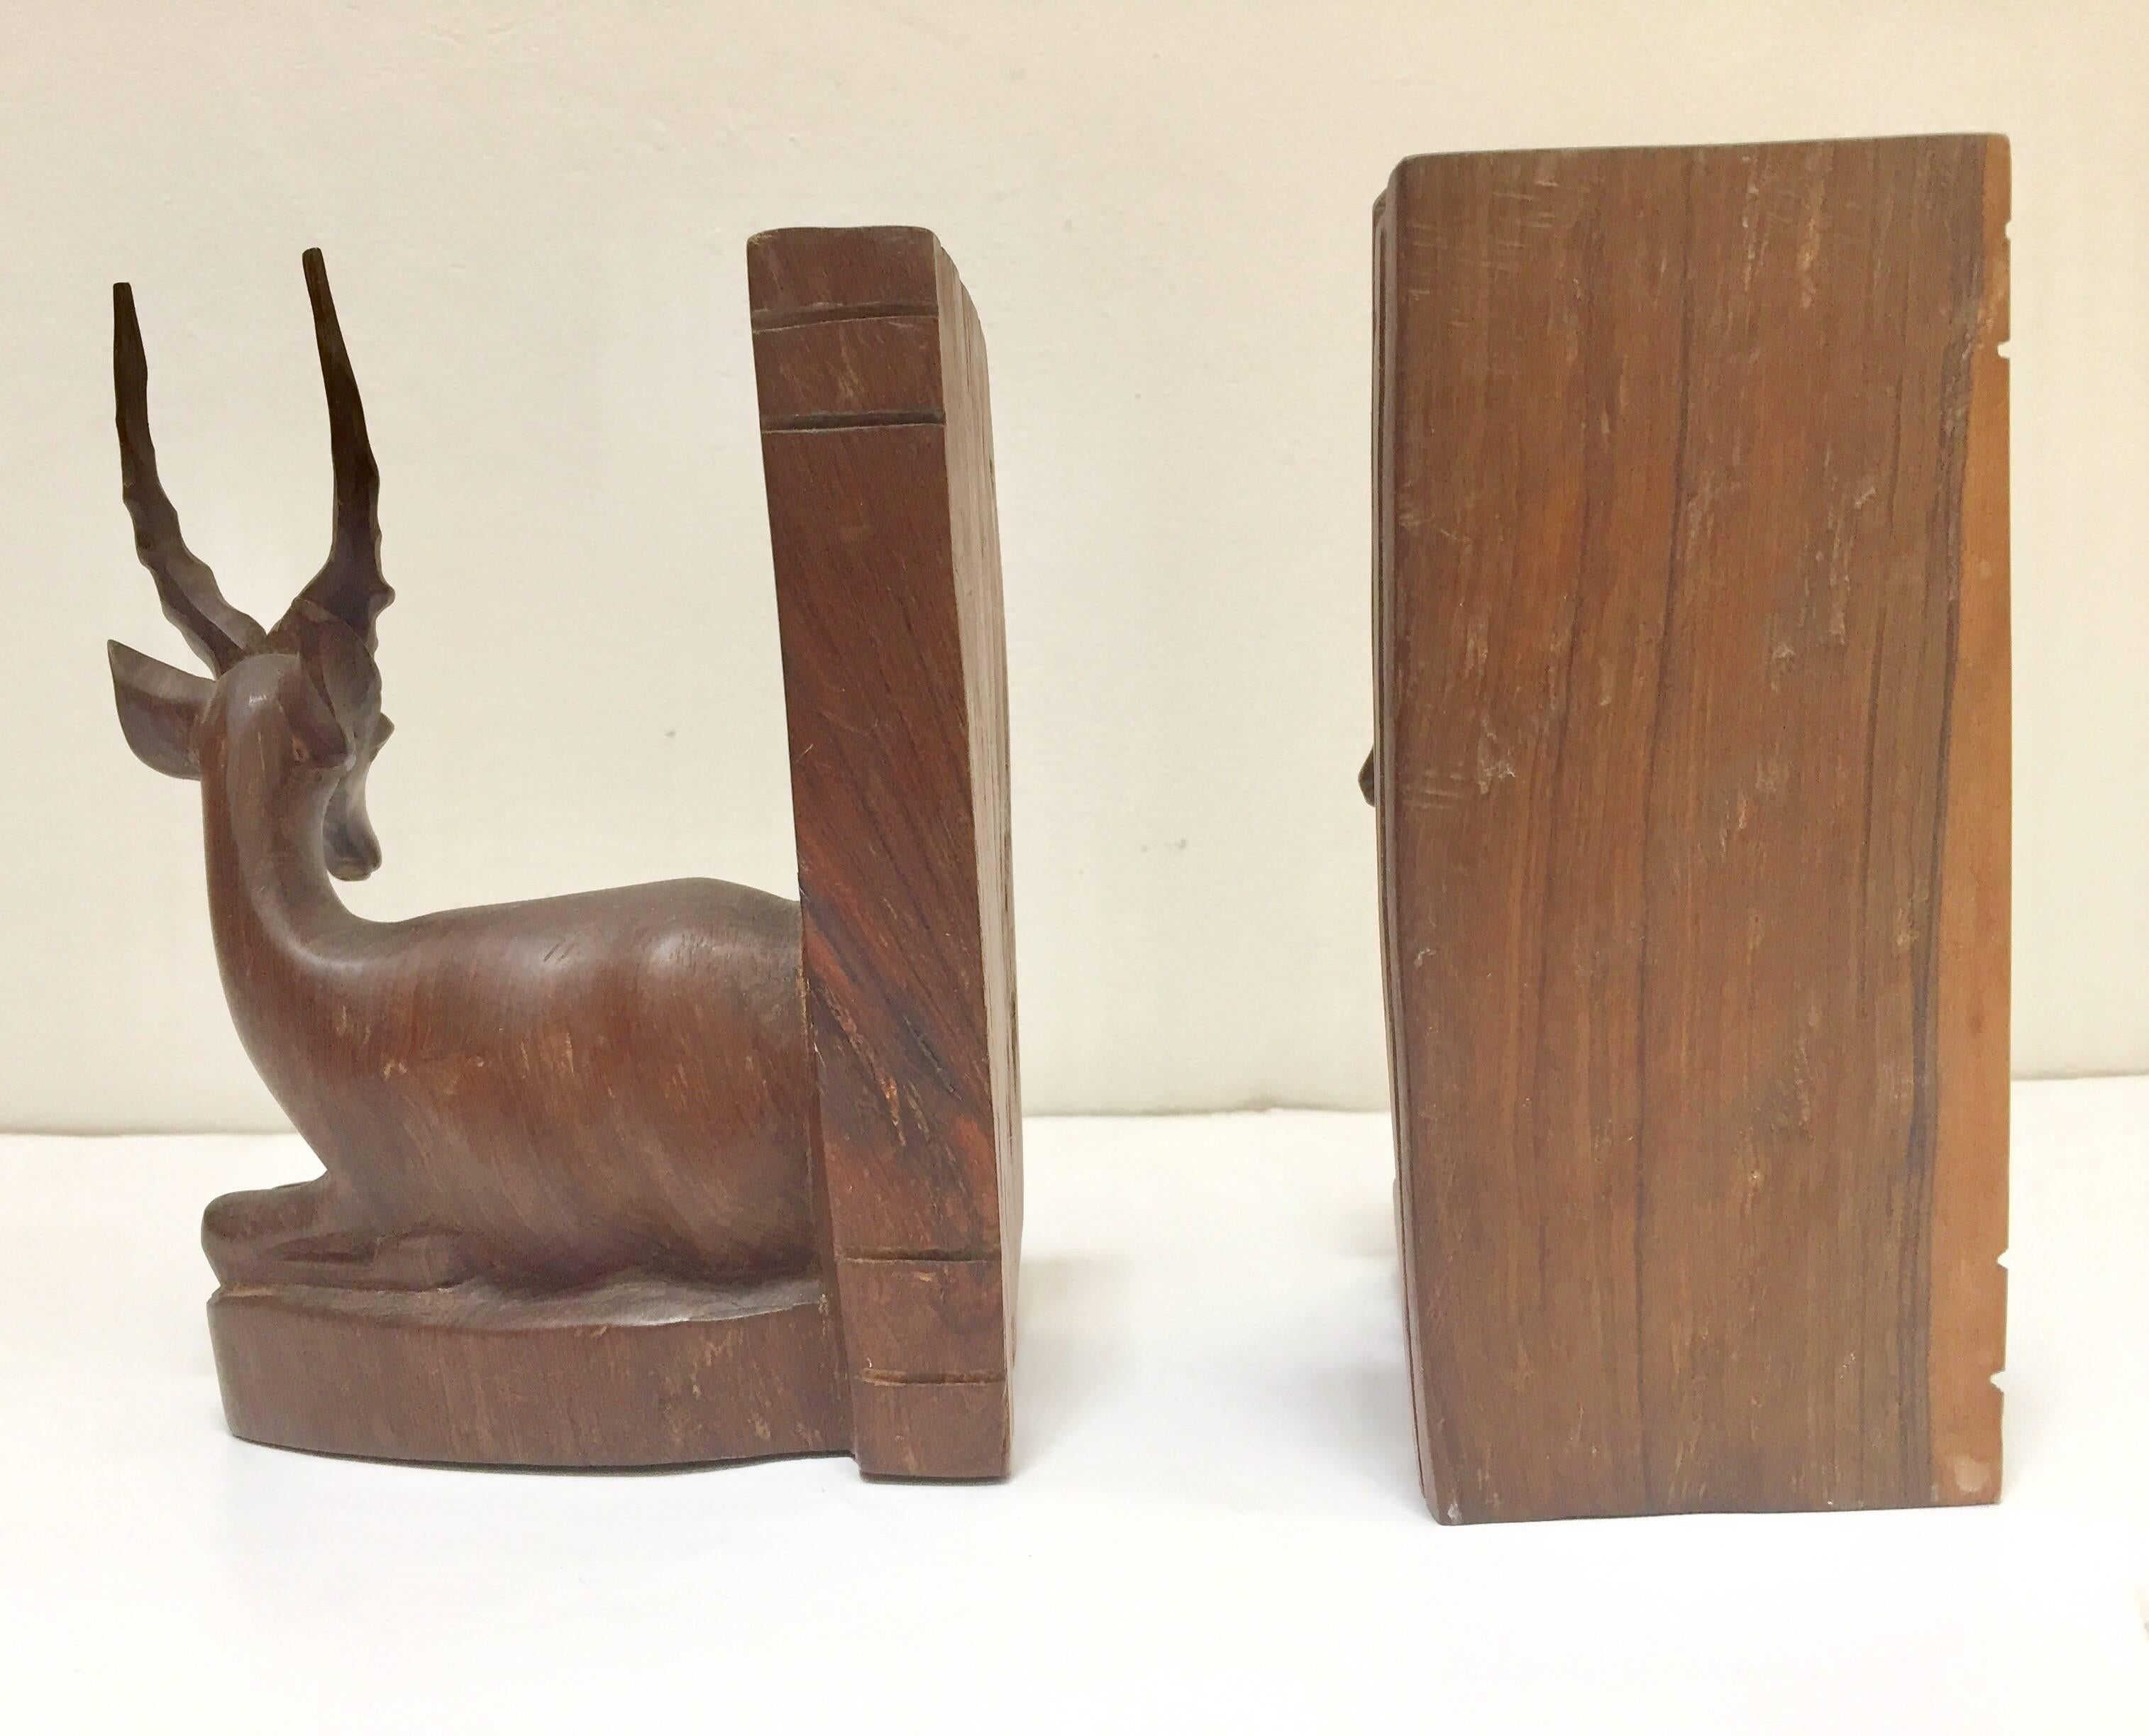 Kenyan Hand-Carved Wooden Mid-Century Antelope Sculptures Bookends